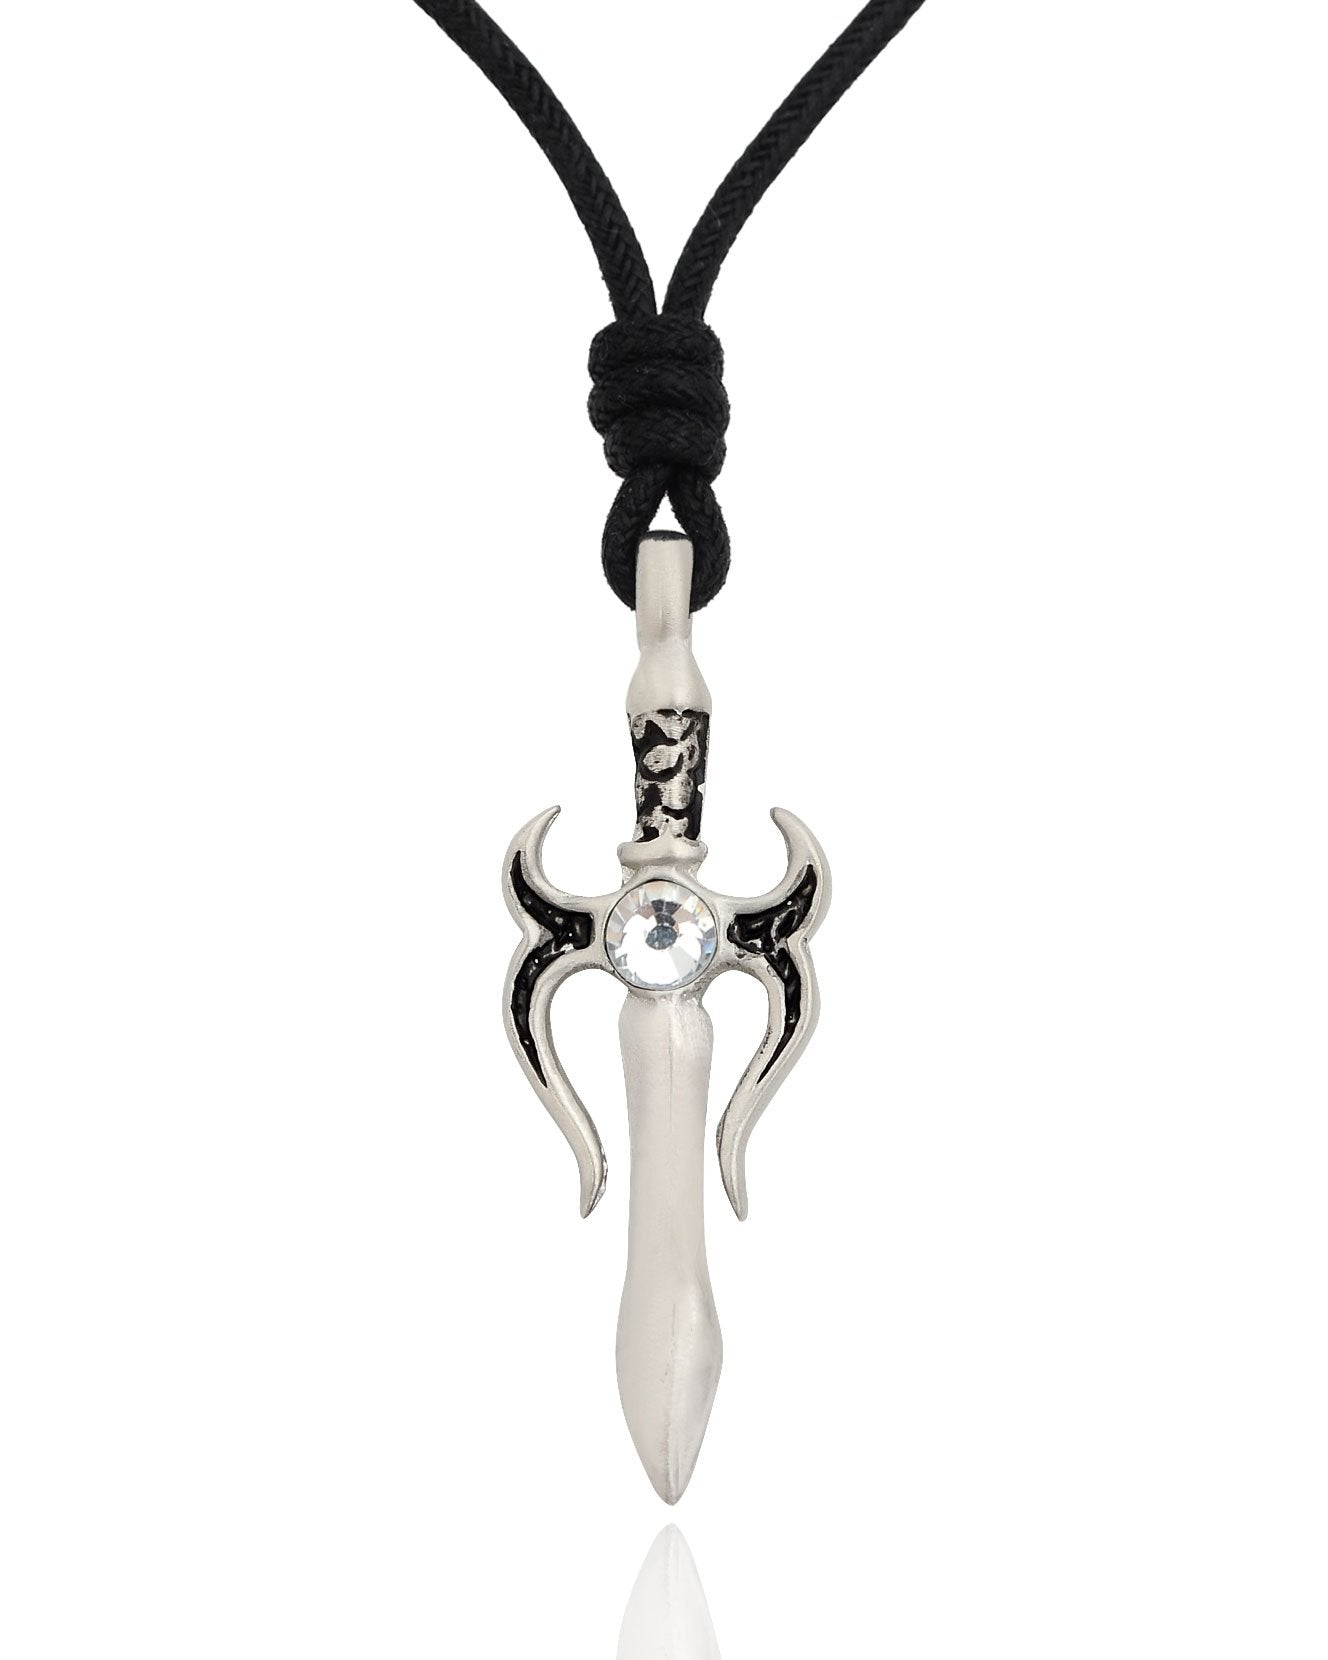 Colorful Sword Silver Pewter Charm Necklace Pendant Jewelry